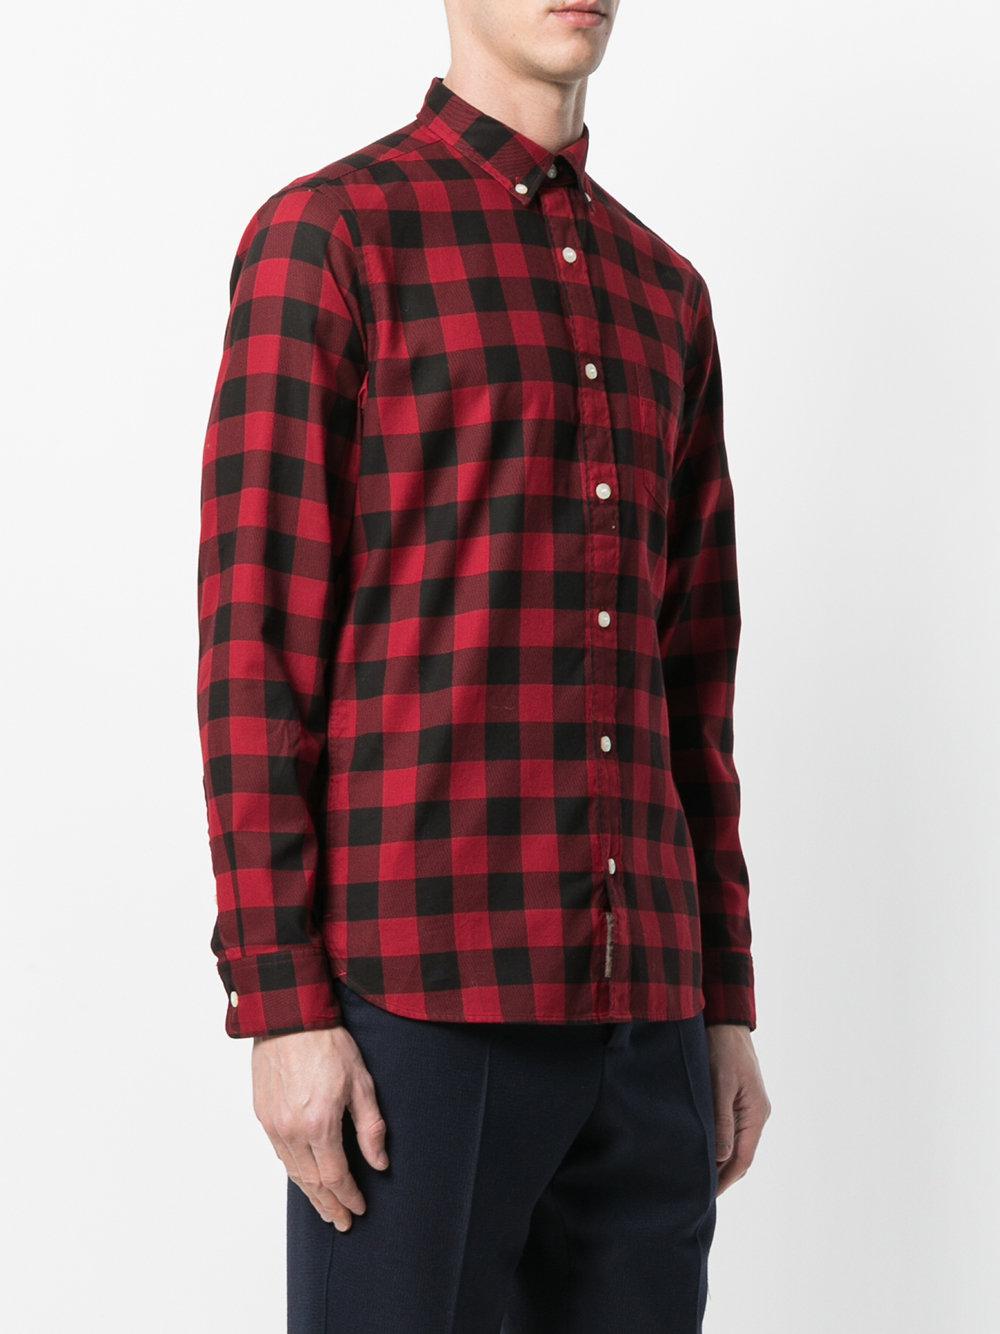 red and black burberry shirt